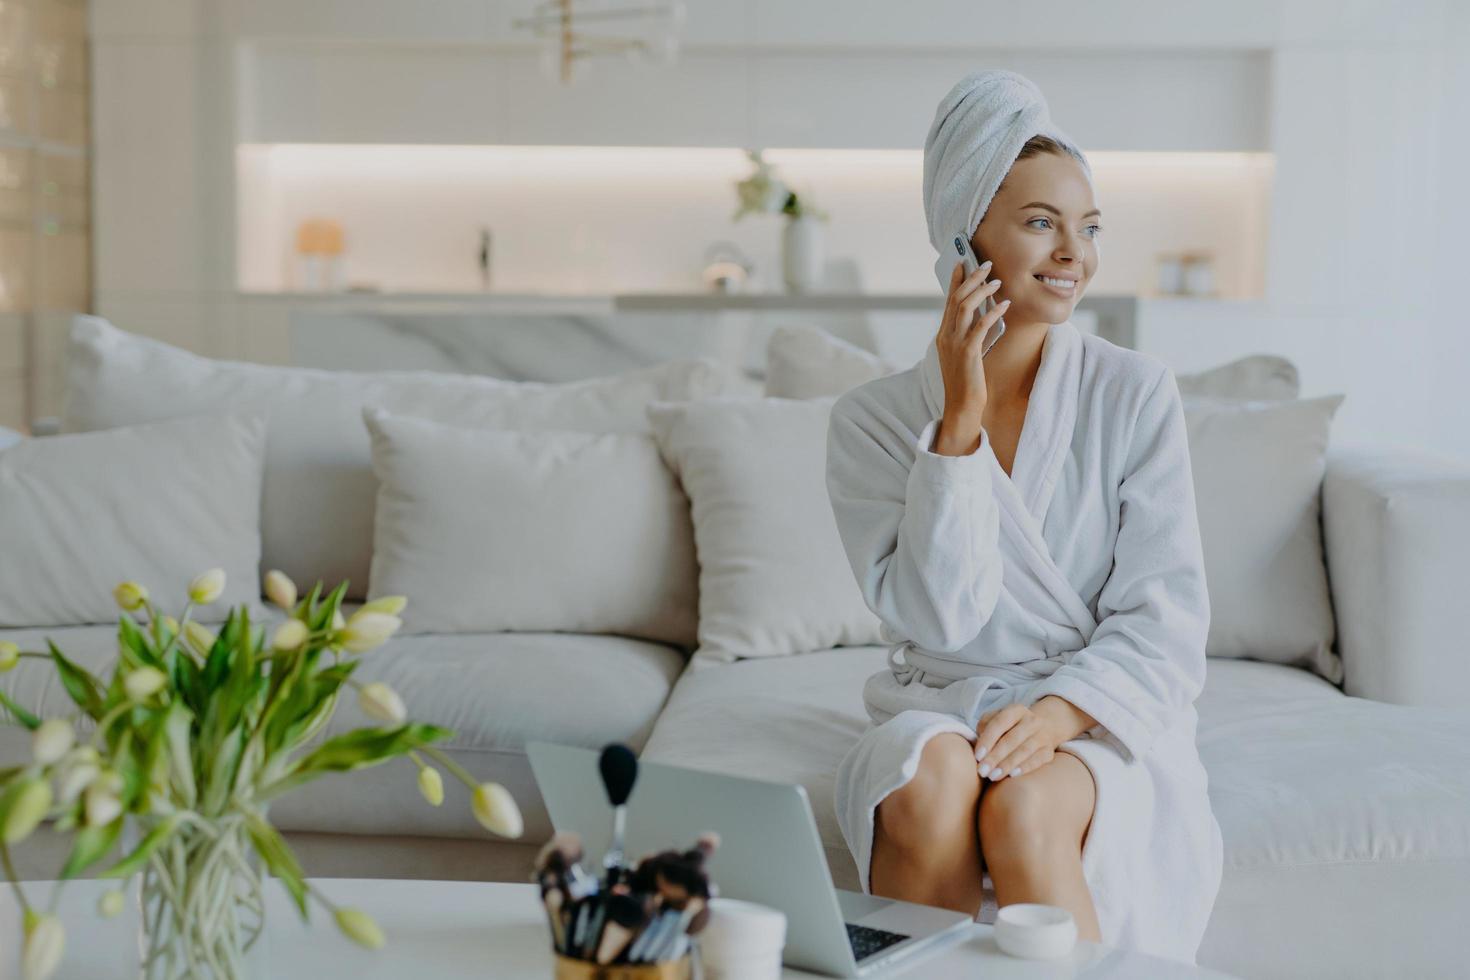 Cheerful beautiful woman looks aside with toothy smile has telephone talk dressed in bathrobe and wrapped towel on head surrounded with modern devices uses cosmetic products to care about herself photo